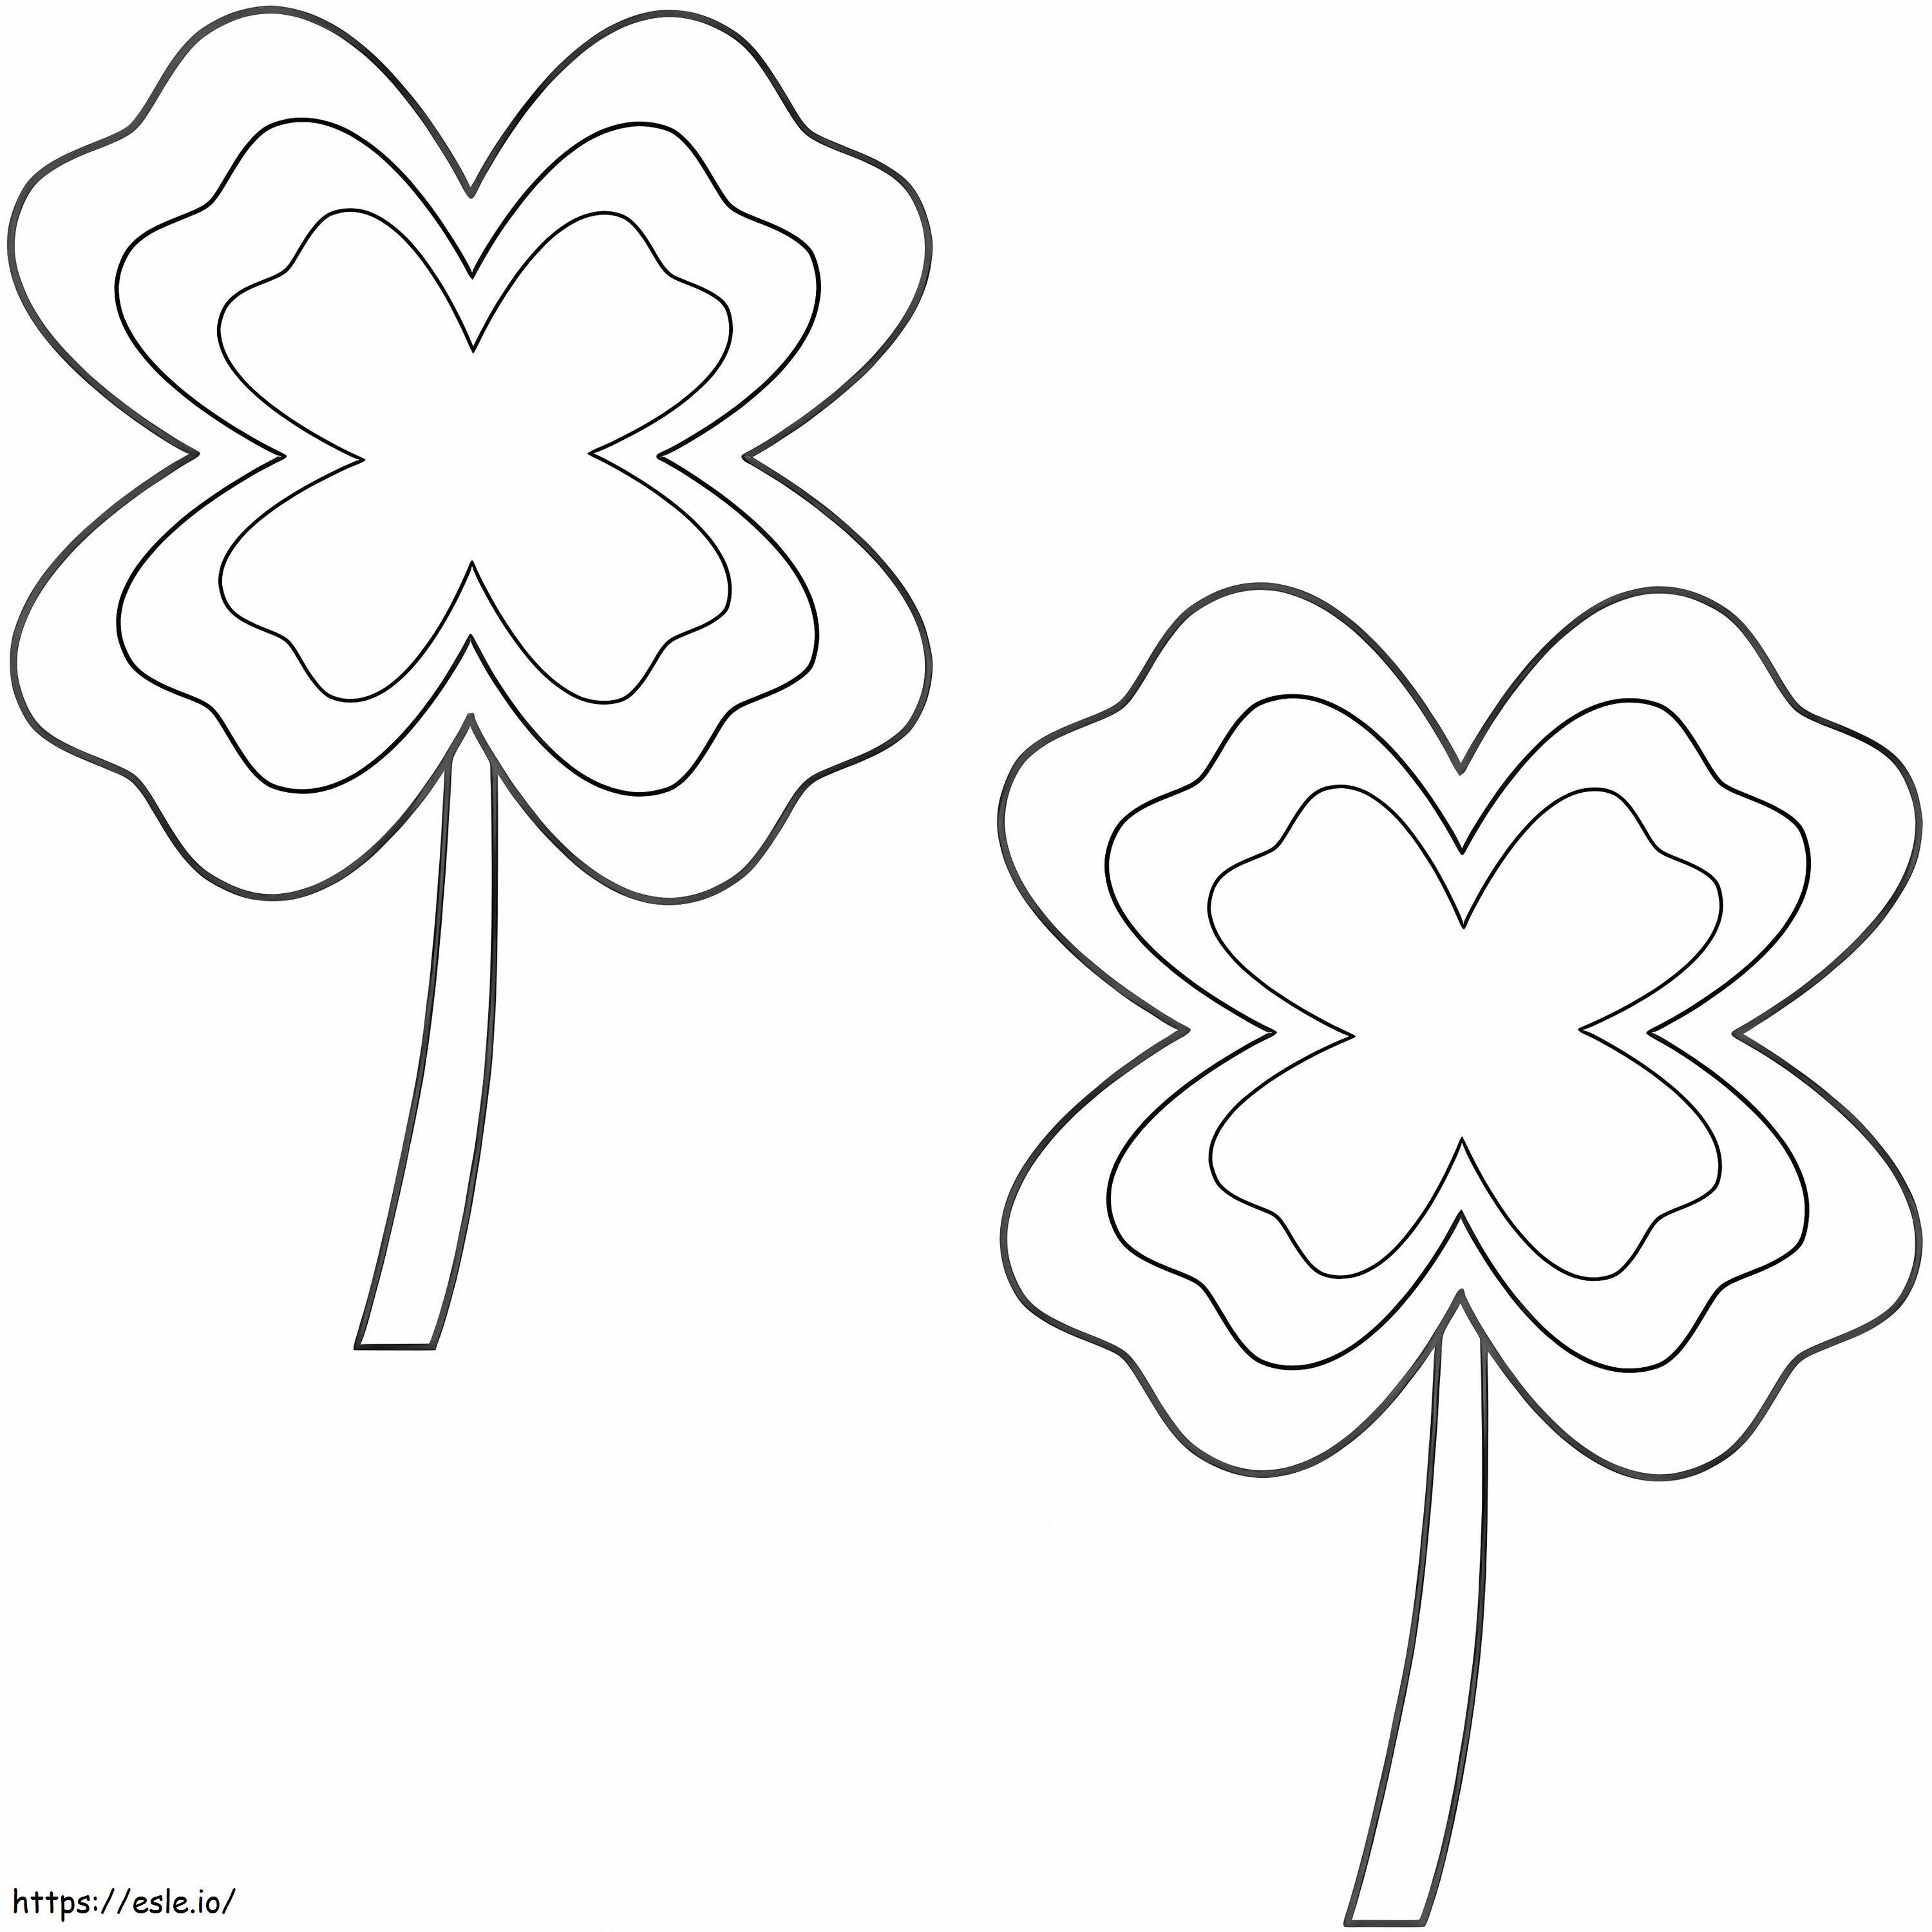 Nice Four Leaf Clover coloring page